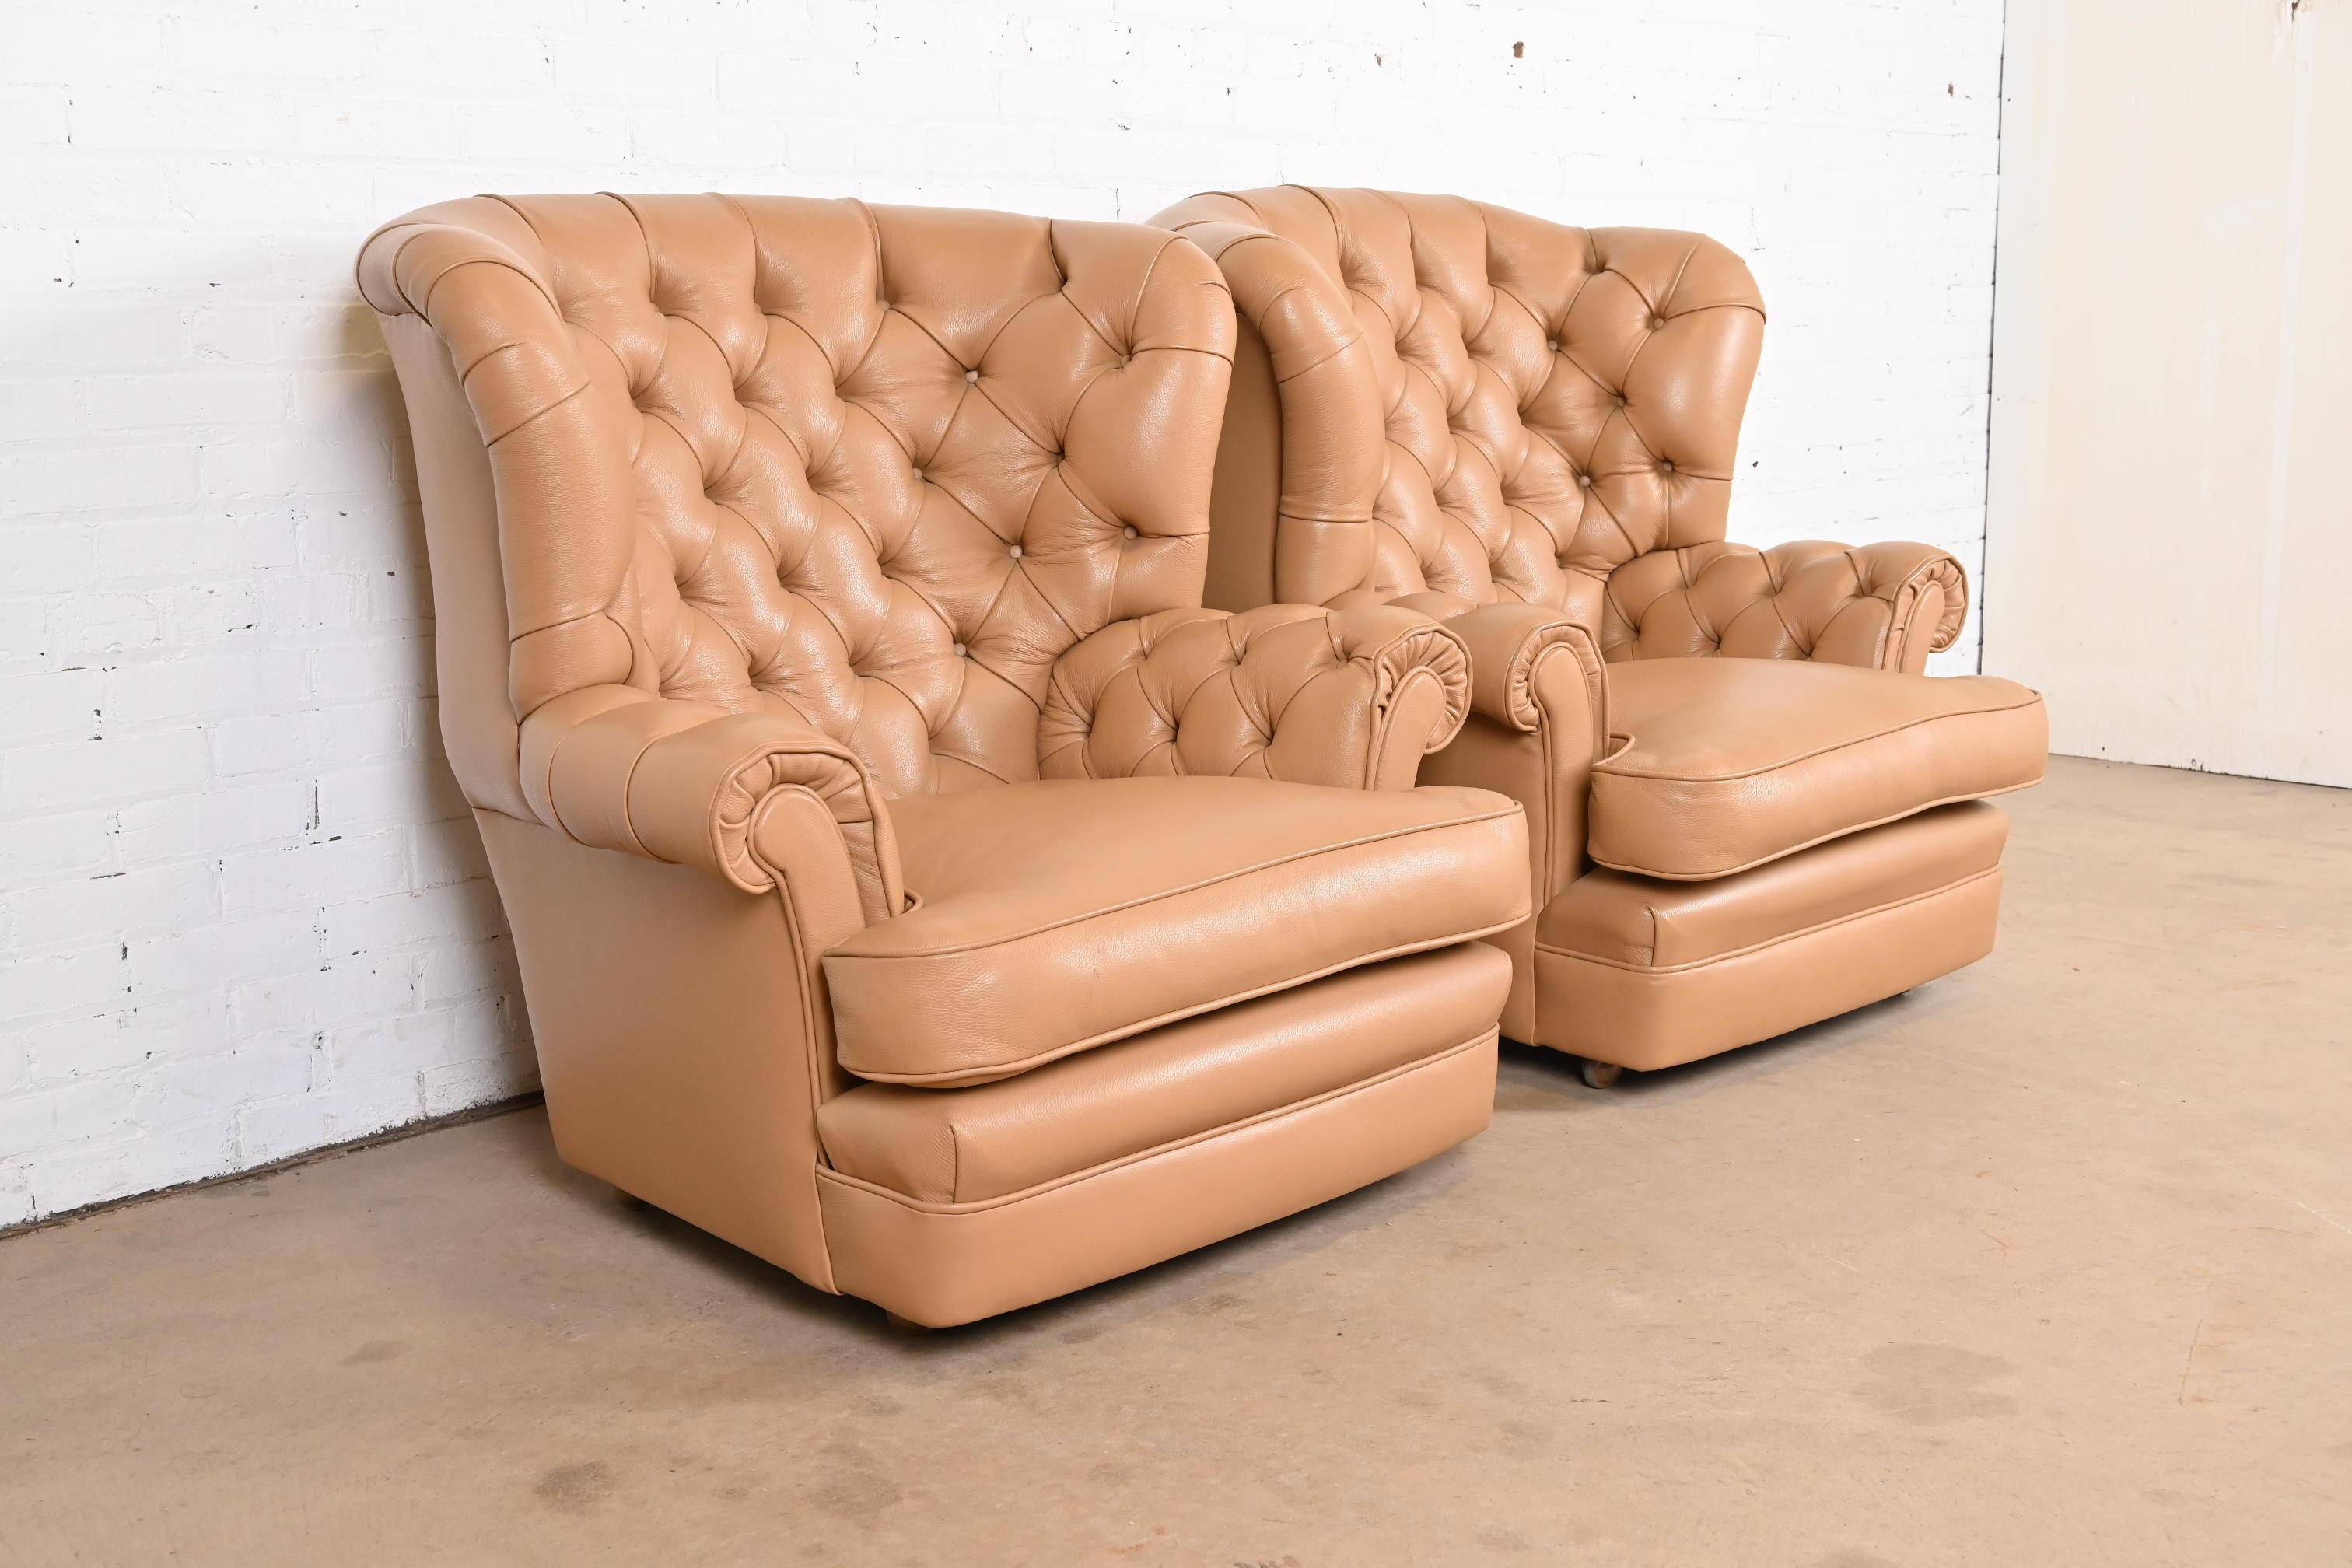 20th Century Vintage Tufted Leather Chesterfield Wingback Lounge Chairs, Pair For Sale